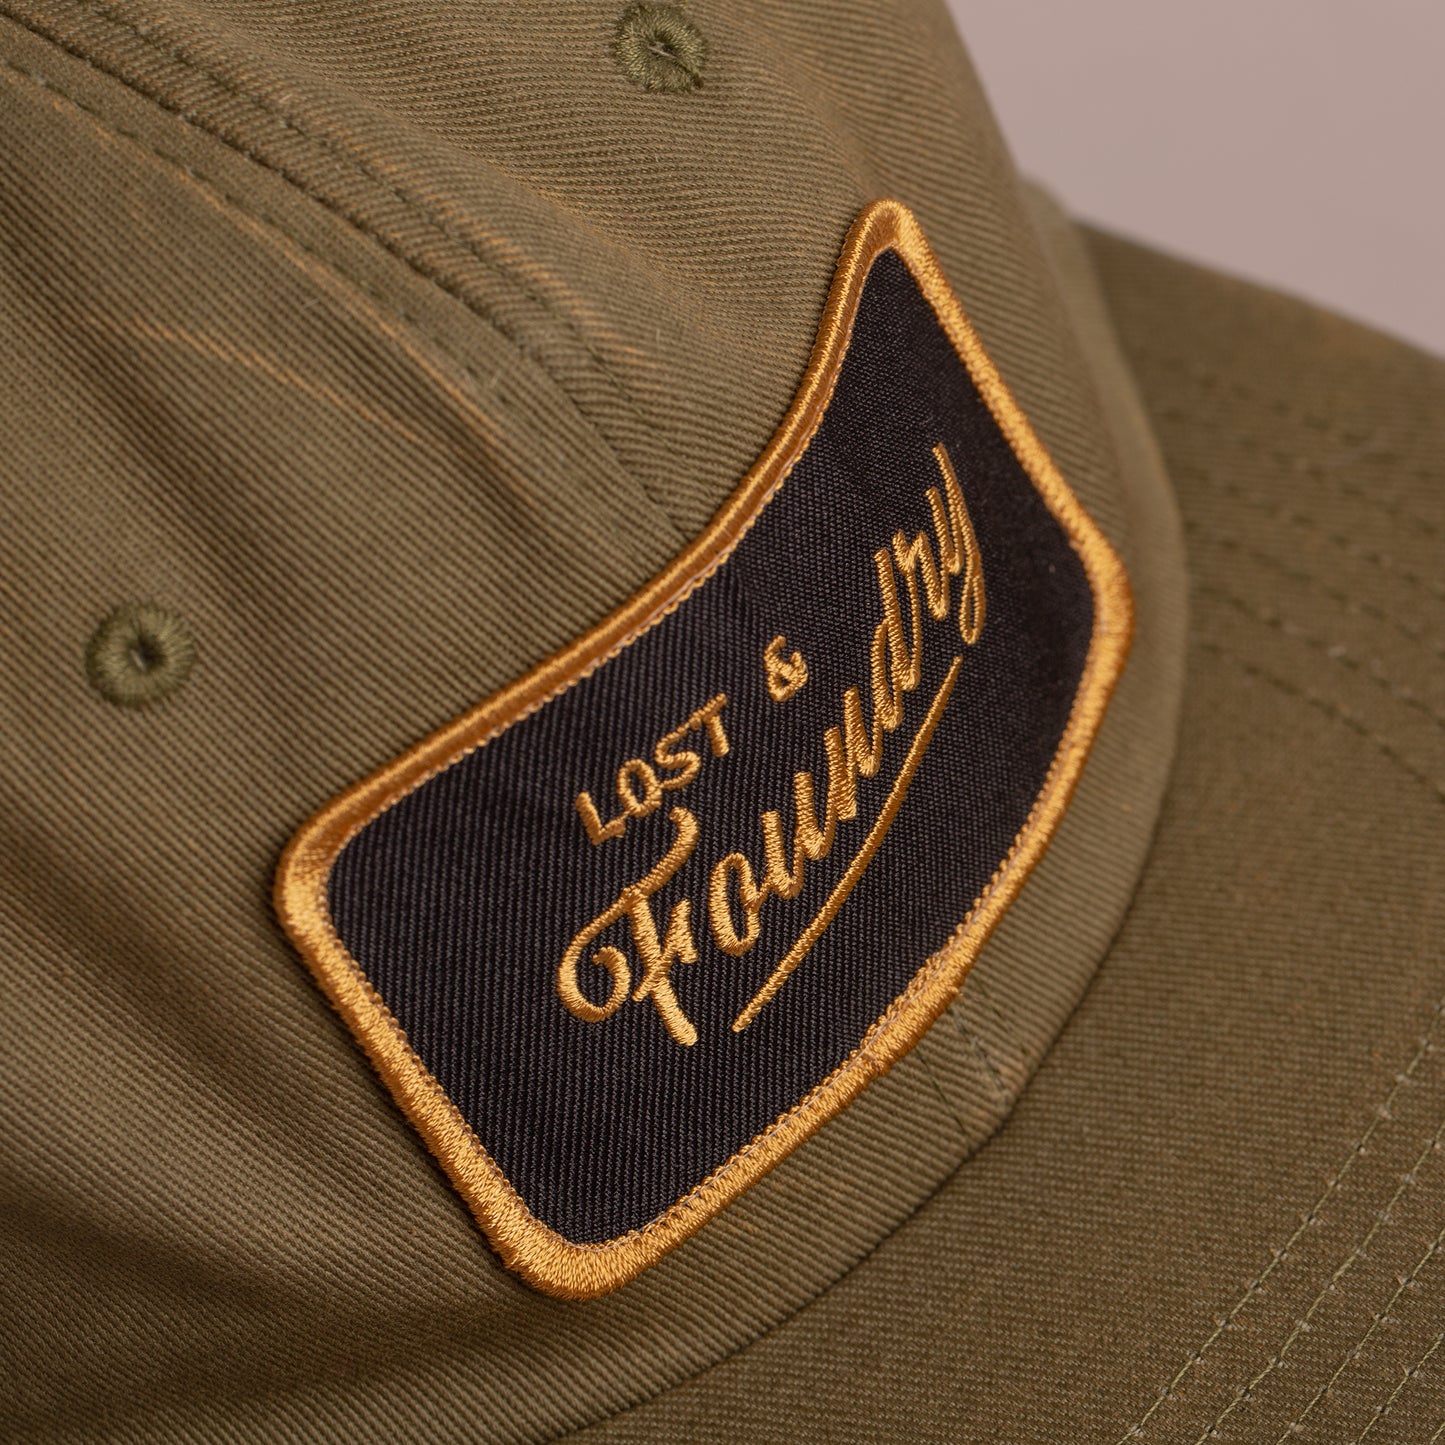 District Patch Hat - Distressed Olive Unstructured Camper